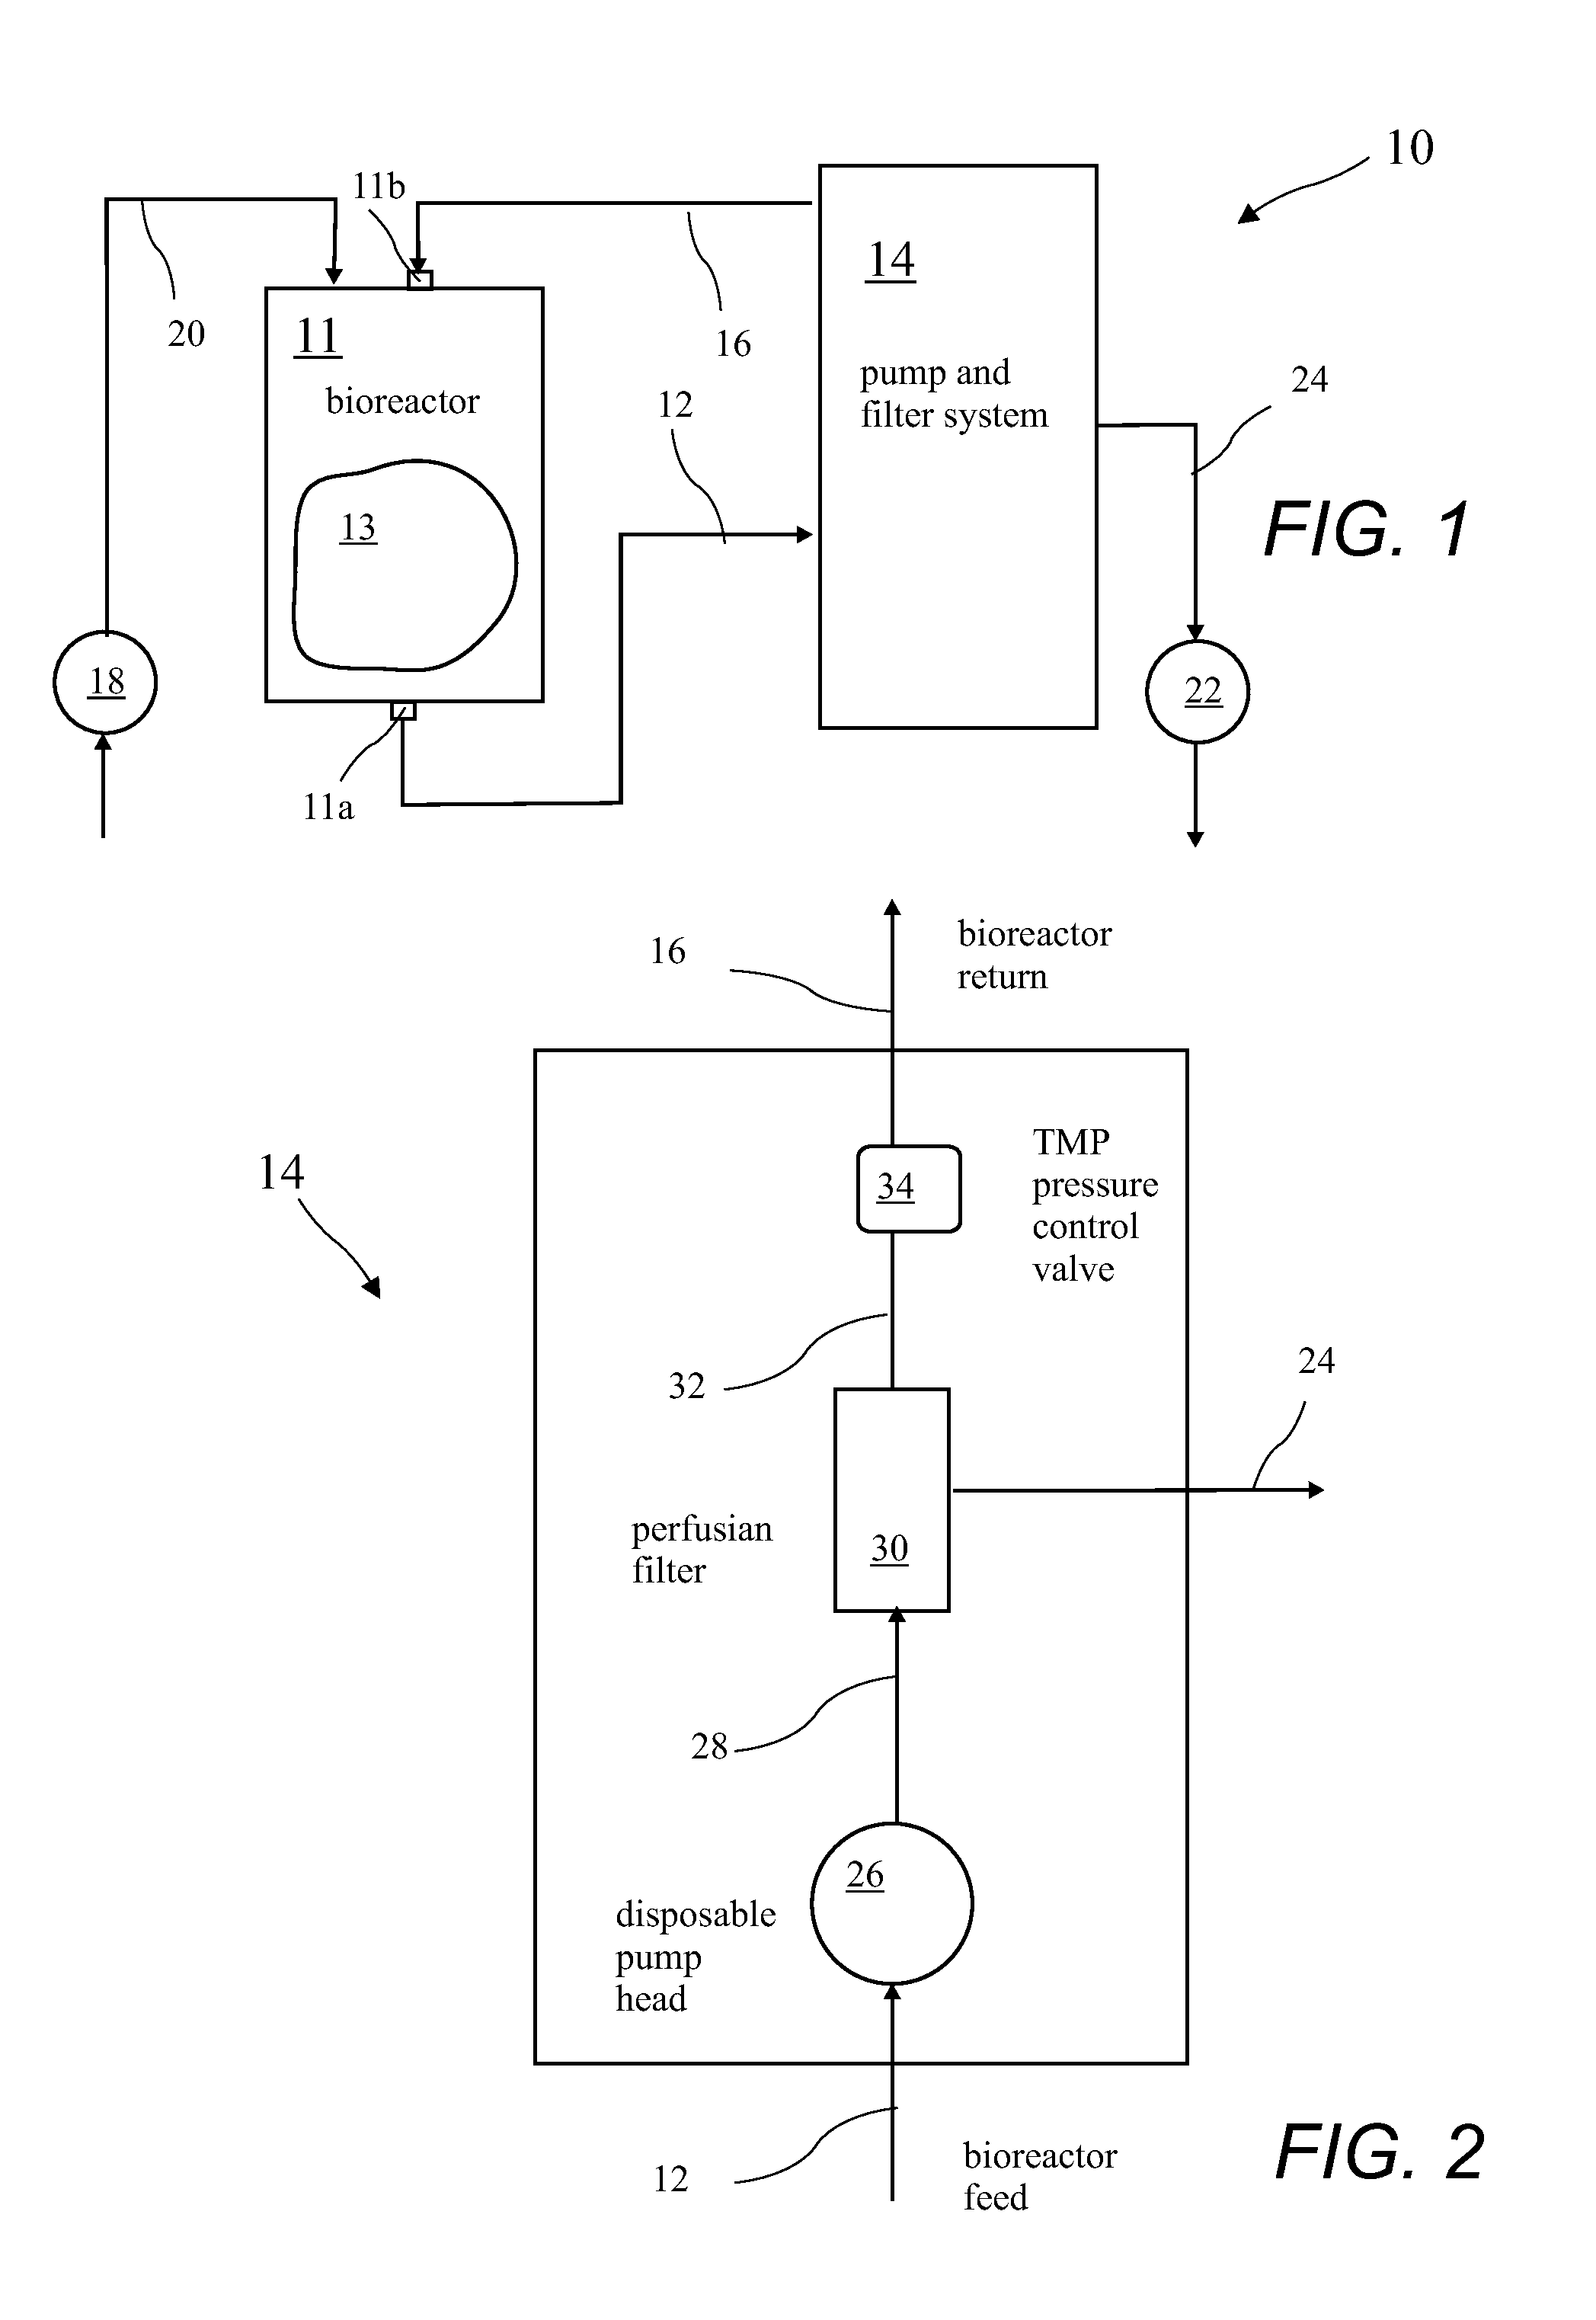 Bioreactor Tangential Flow Perfusion Filter System